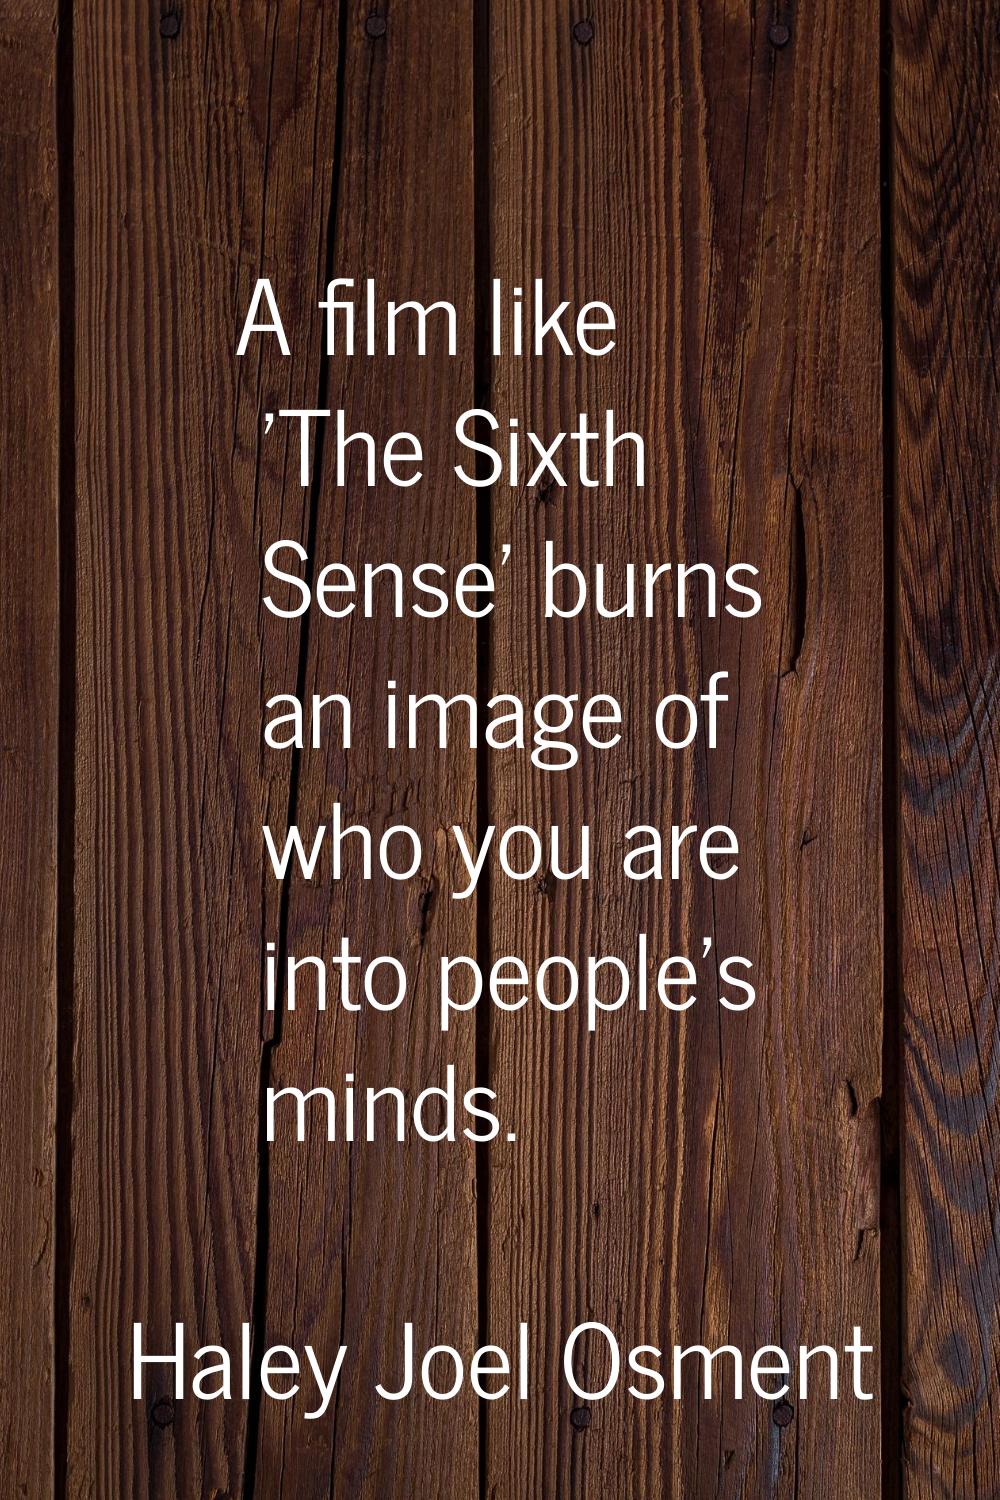 A film like 'The Sixth Sense' burns an image of who you are into people's minds.